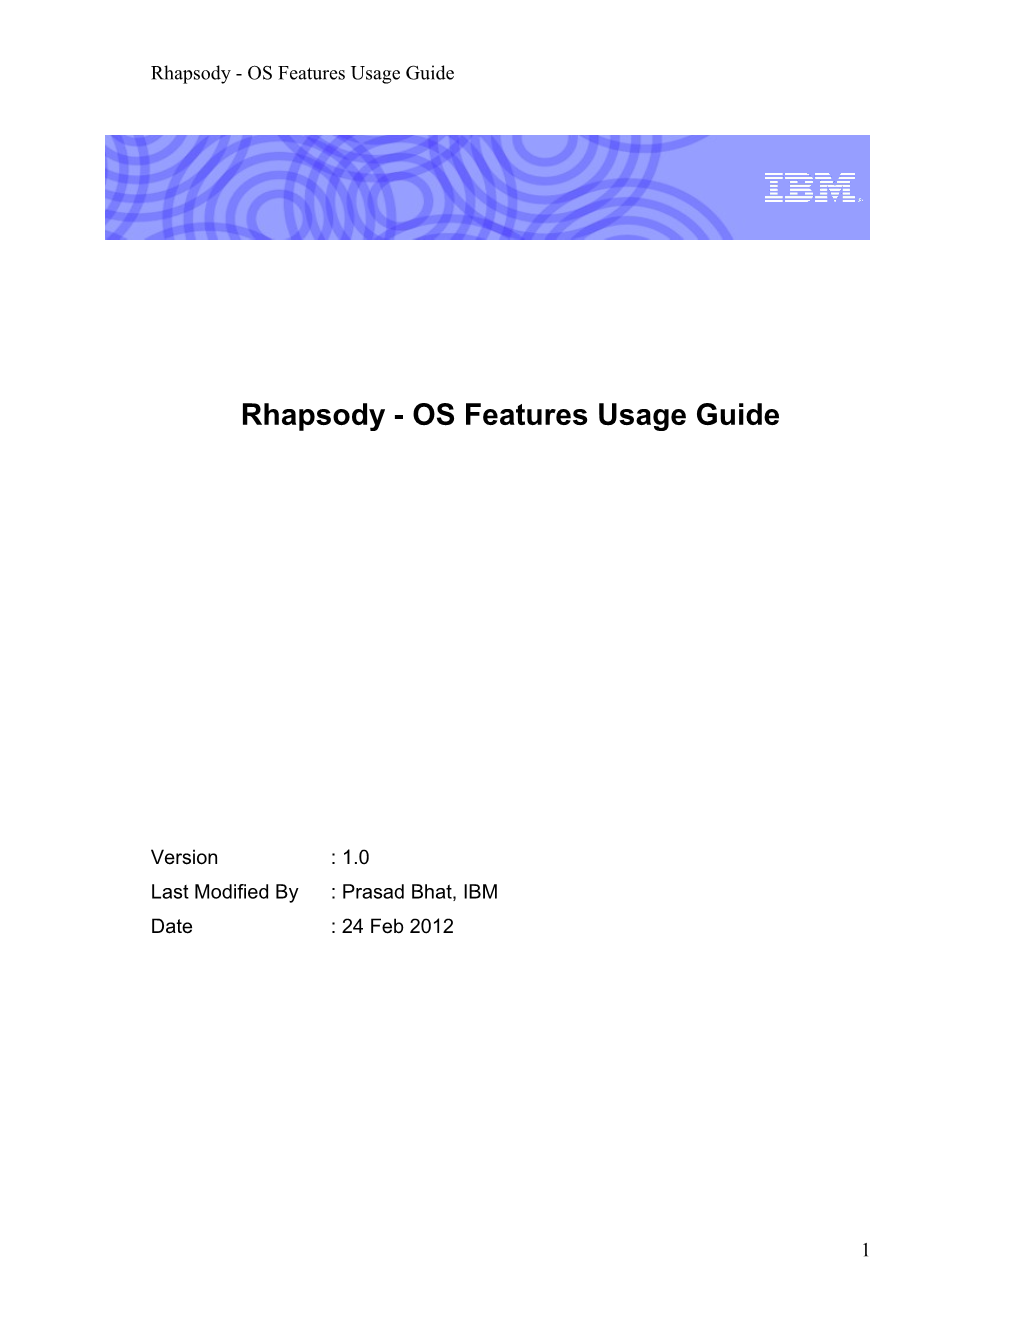 Rhapsody - OS Features Usage Guide